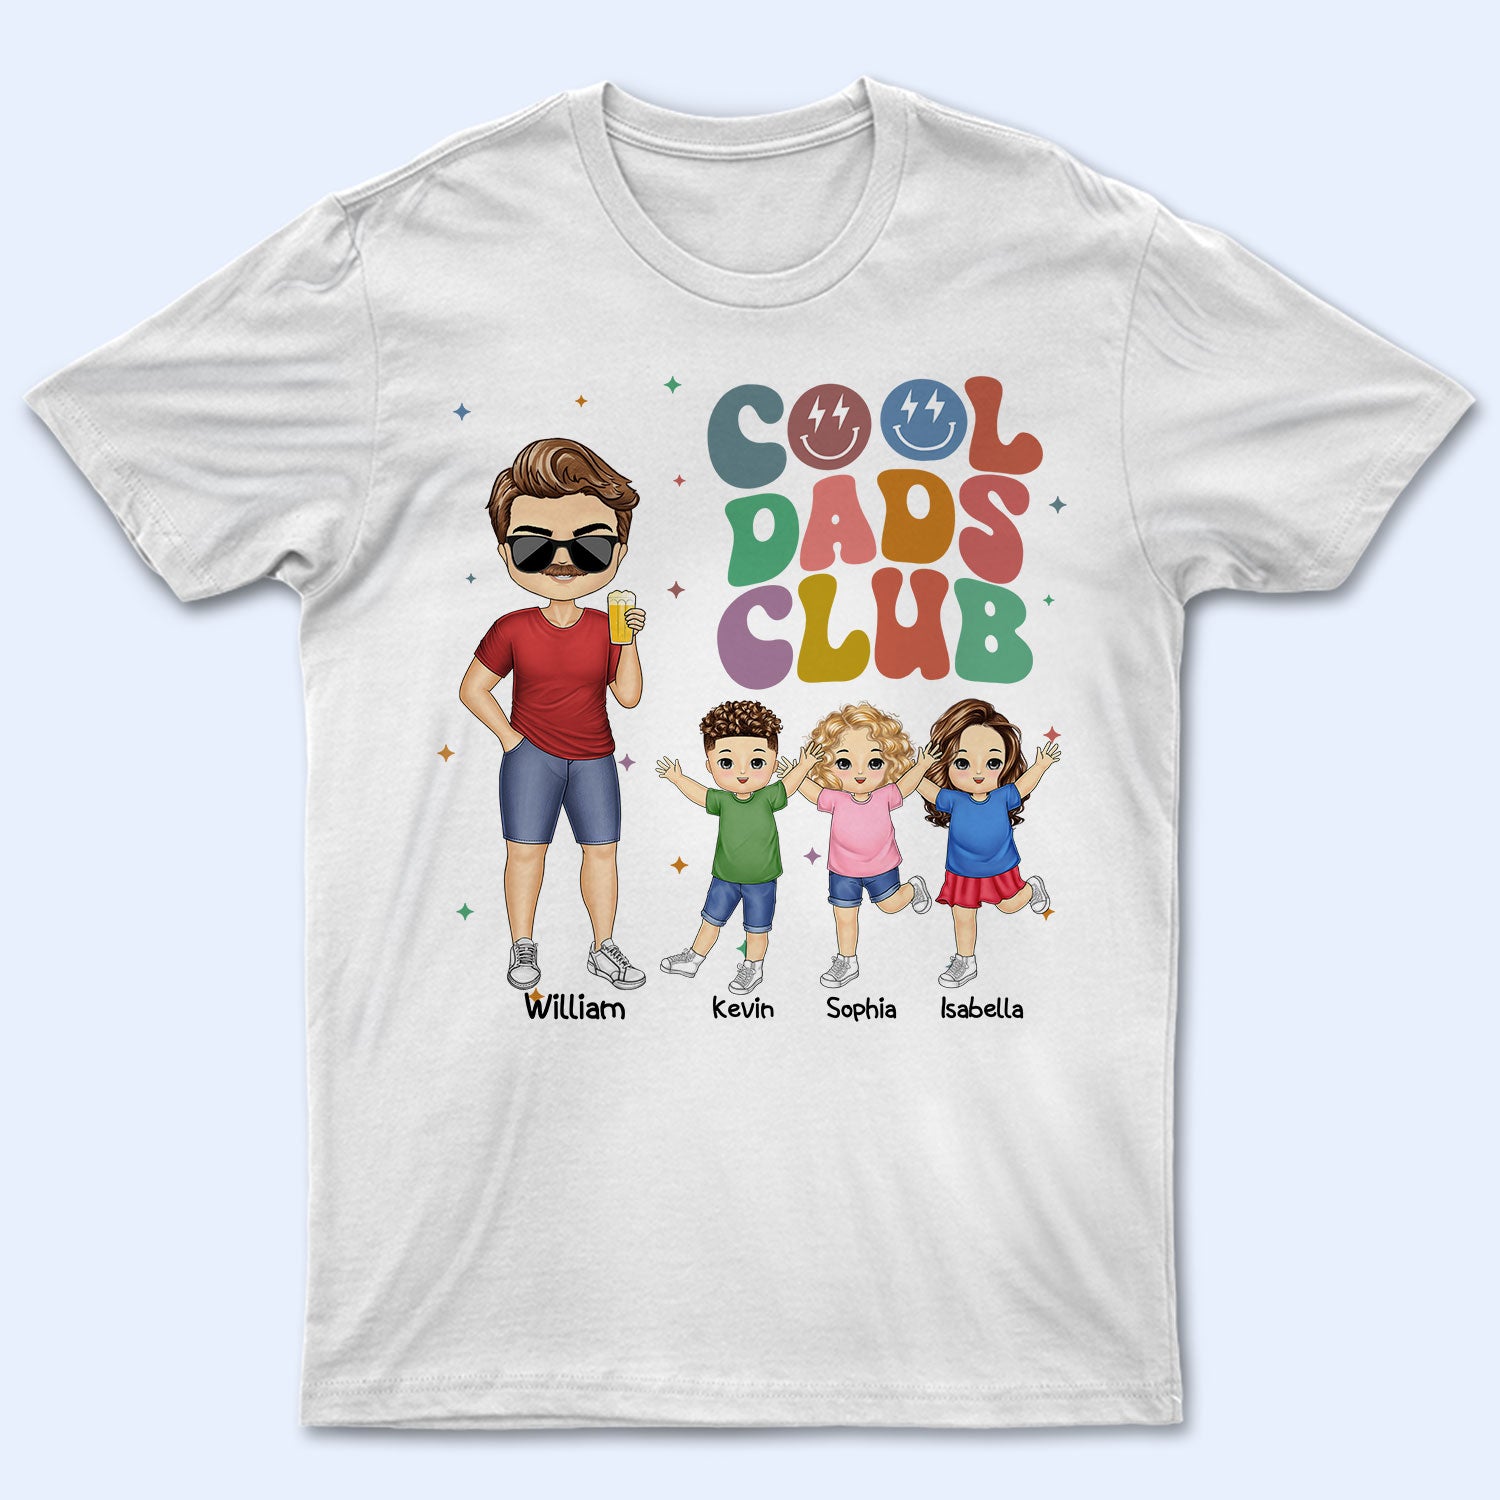 Cool Dads Club - Gift For Father, Grandfather, Grandpa - Personalized T Shirt